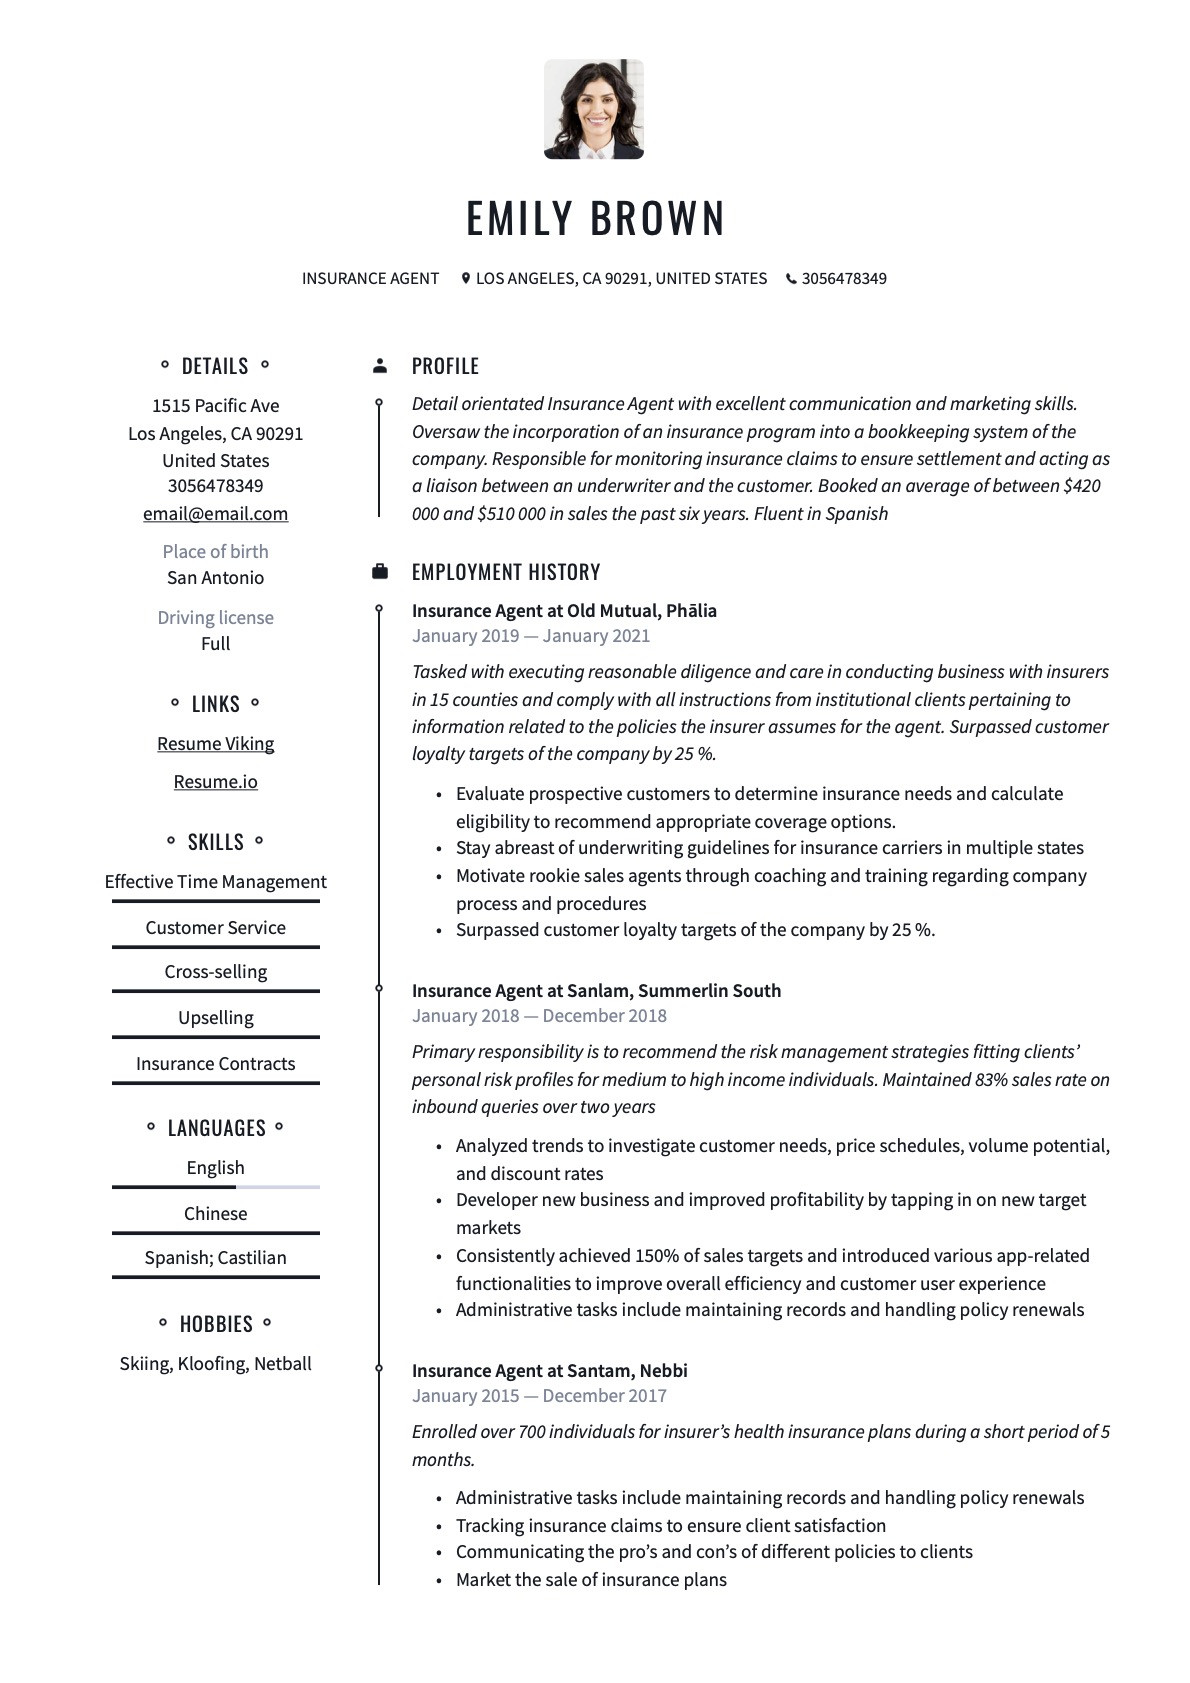 Insurance Csr Resume Sample assisting In Gathering Of Renewal Exposure Insurance Agent Resume & Writing Guide  20 Templates